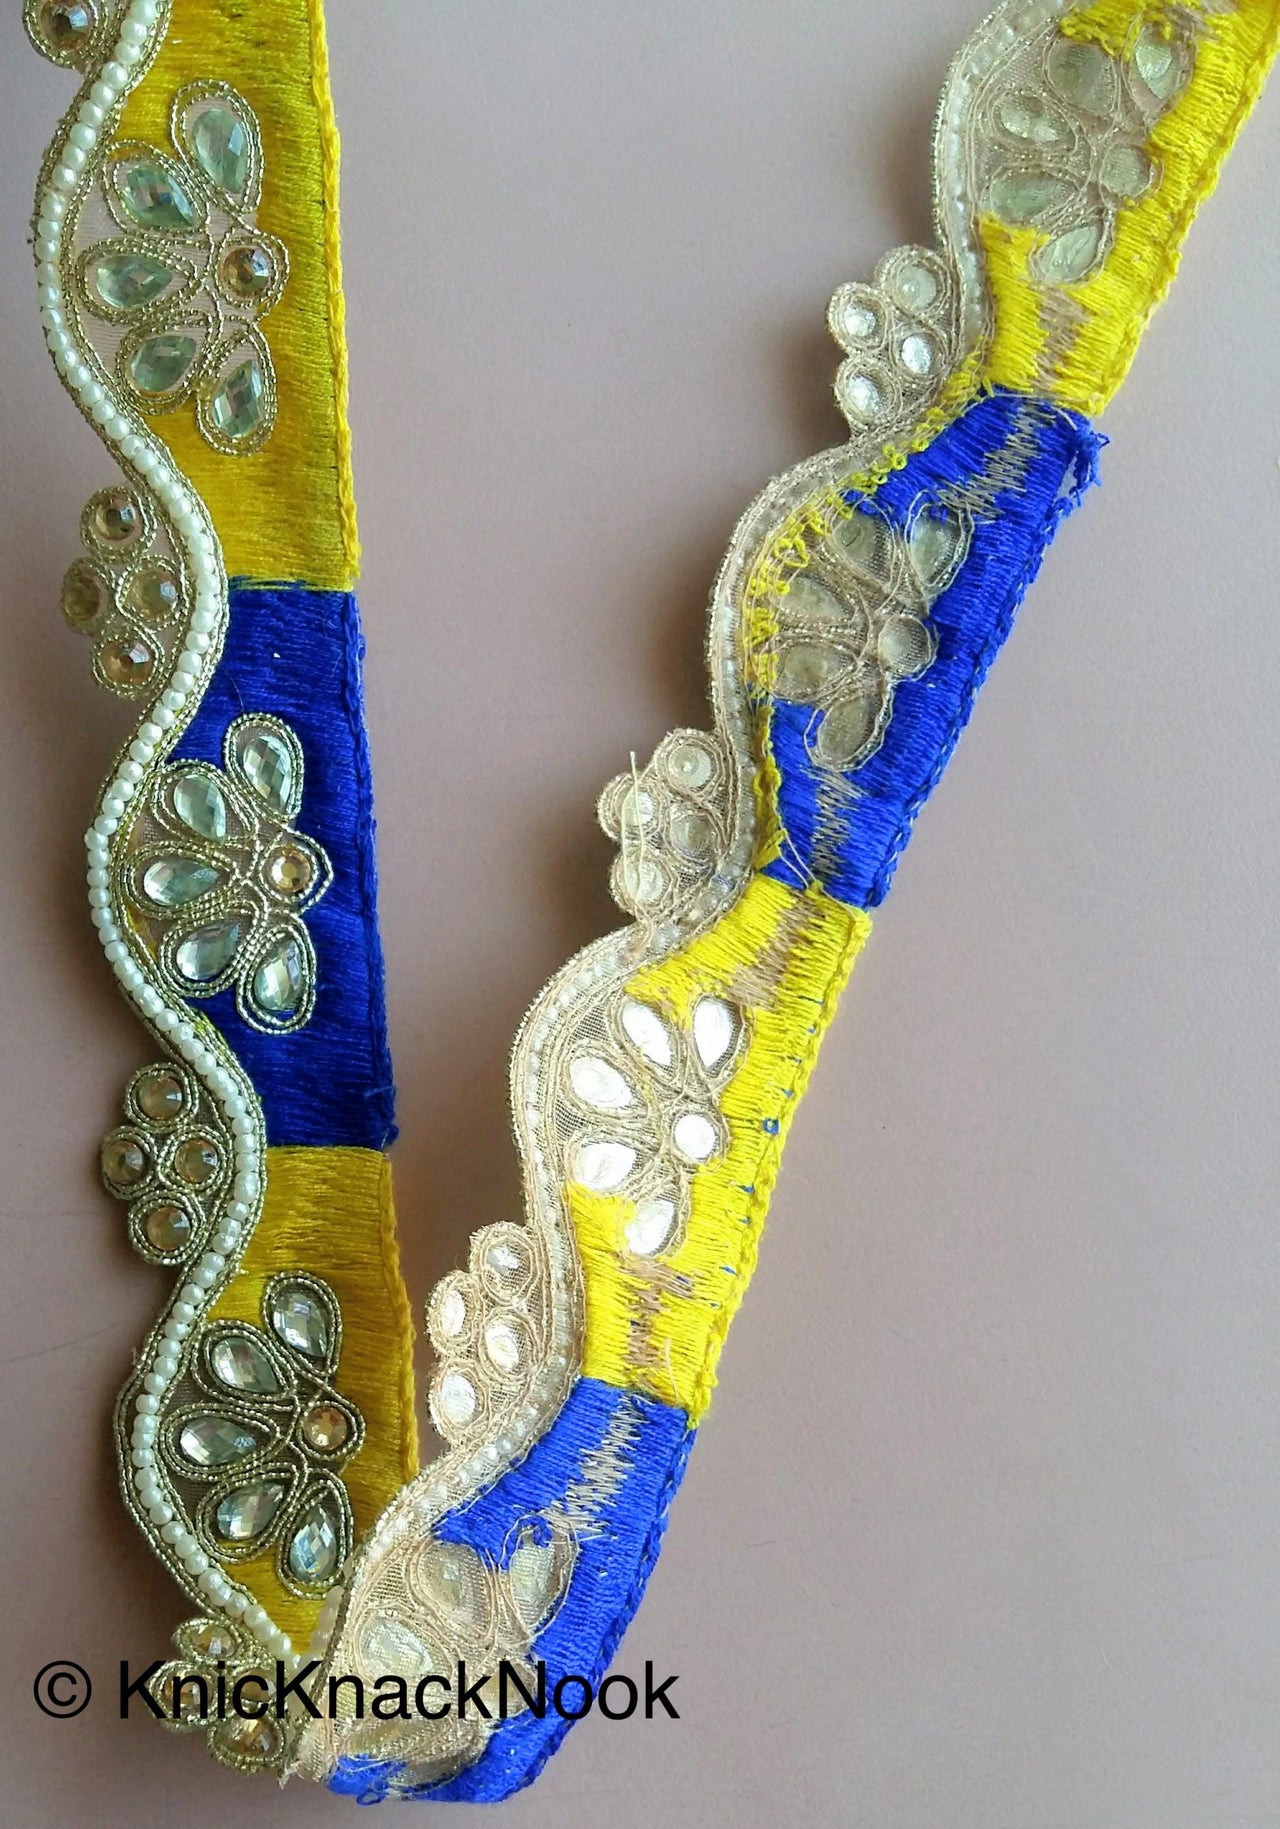 Gold Sheer Fabric Trim In Blue And Yellow Embroidered Beaded Trim, Kundan Work And Pearl, Costume Trim Decorative Craft Ribbon Trim By Yard